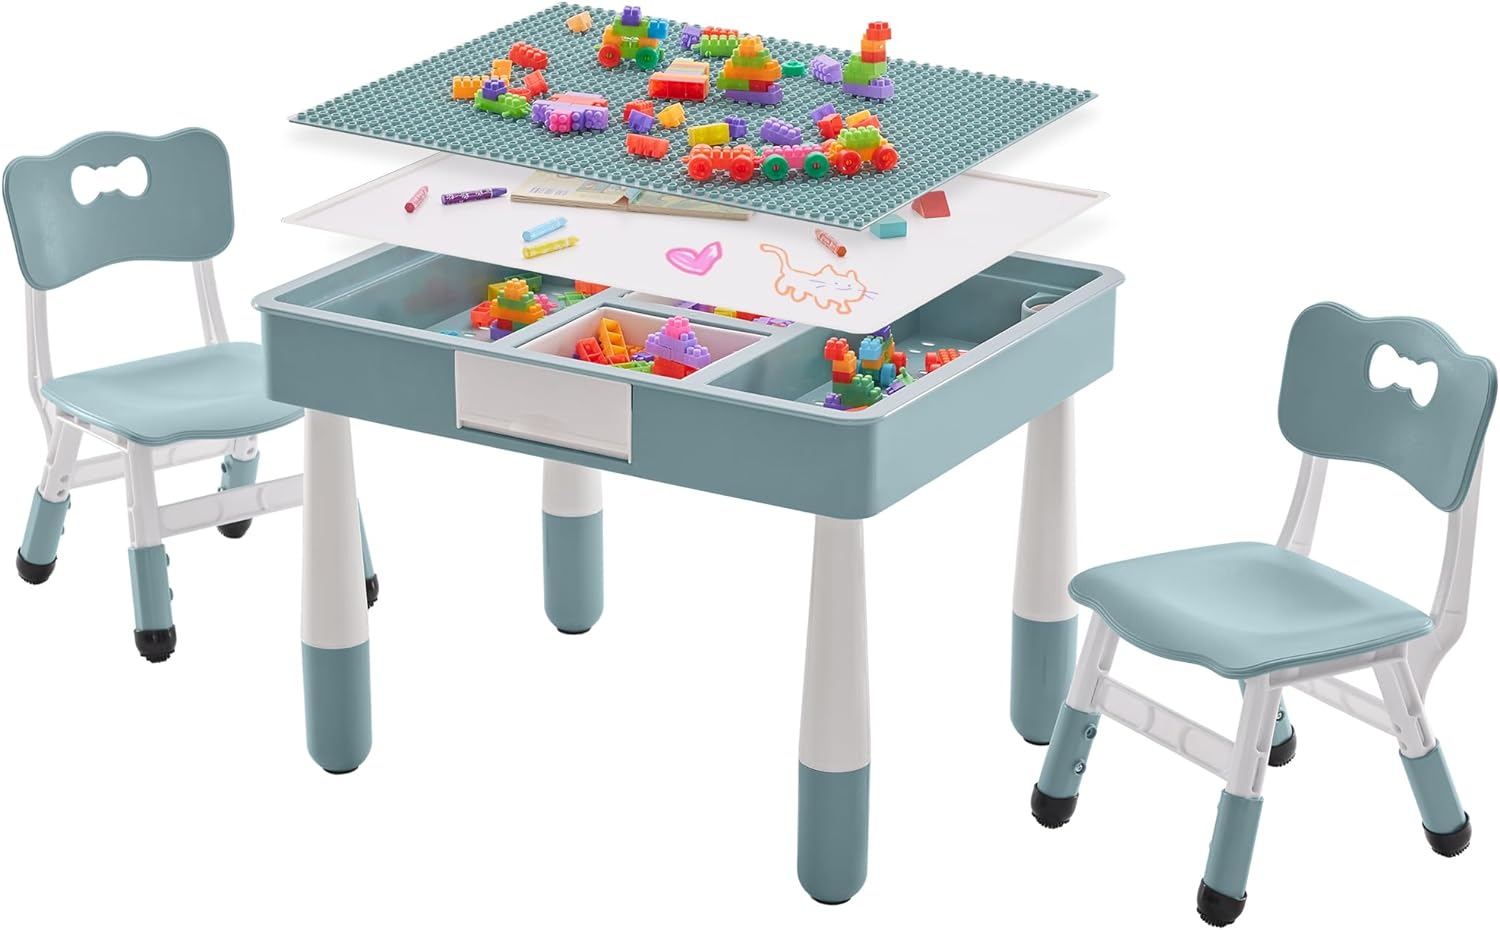 Baby Furniture: Kids activity table and chairs set